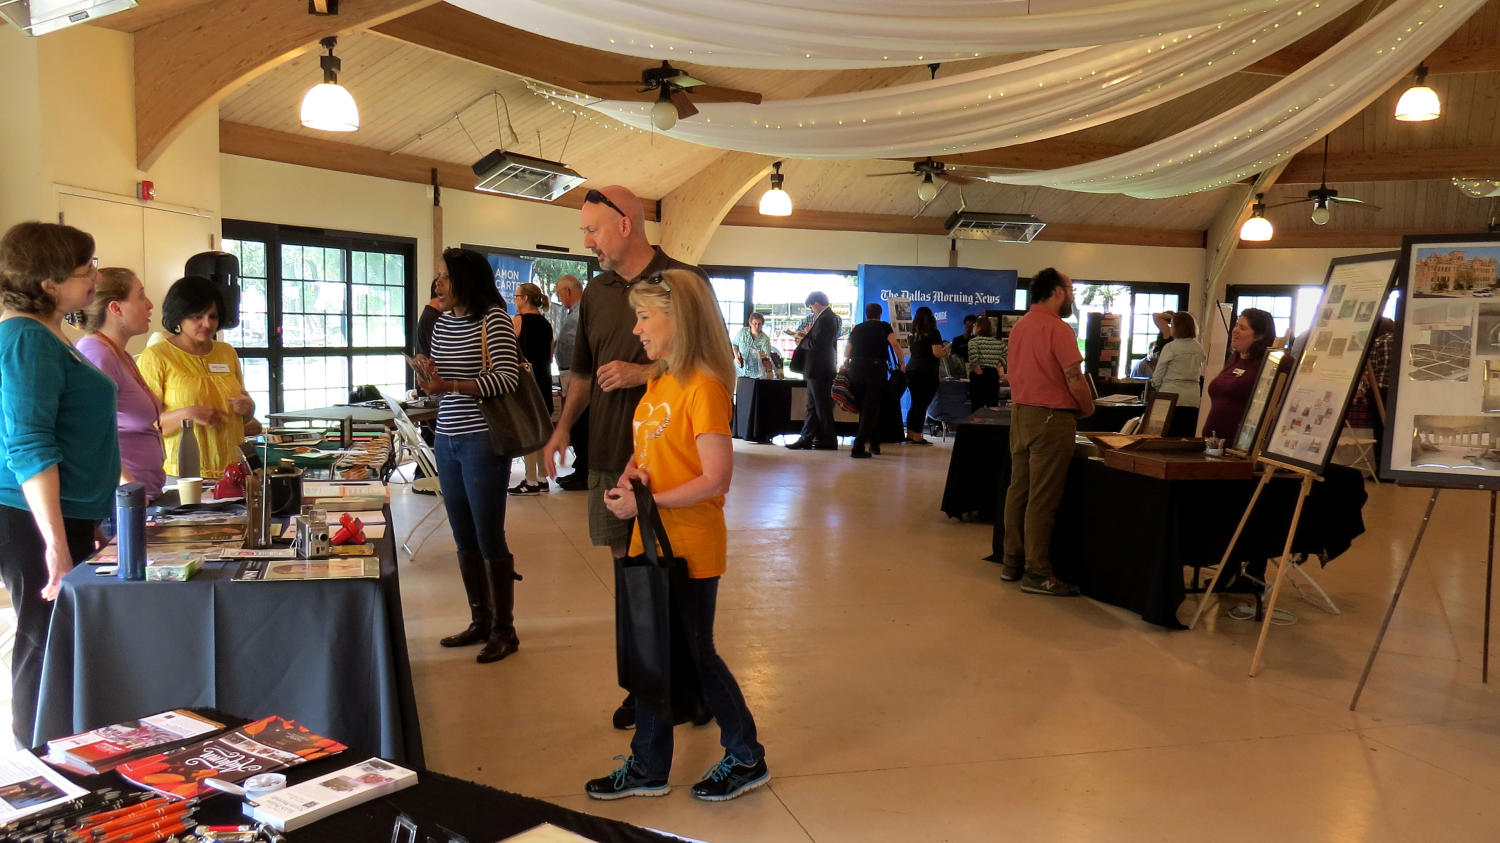 [Visitors walking up to the Sixth Floor Museum table], Photograph of visitors walking up to the Sixth Floor Museum at Dealy Plaza table during the DFW Archives Bazaar at the Dallas Heritage Village Pavilion. There are artifacts from the 60s including a small radio, a View-Master toy, copies of LIFE Magazine, a purse, a phone, and paper handouts., 